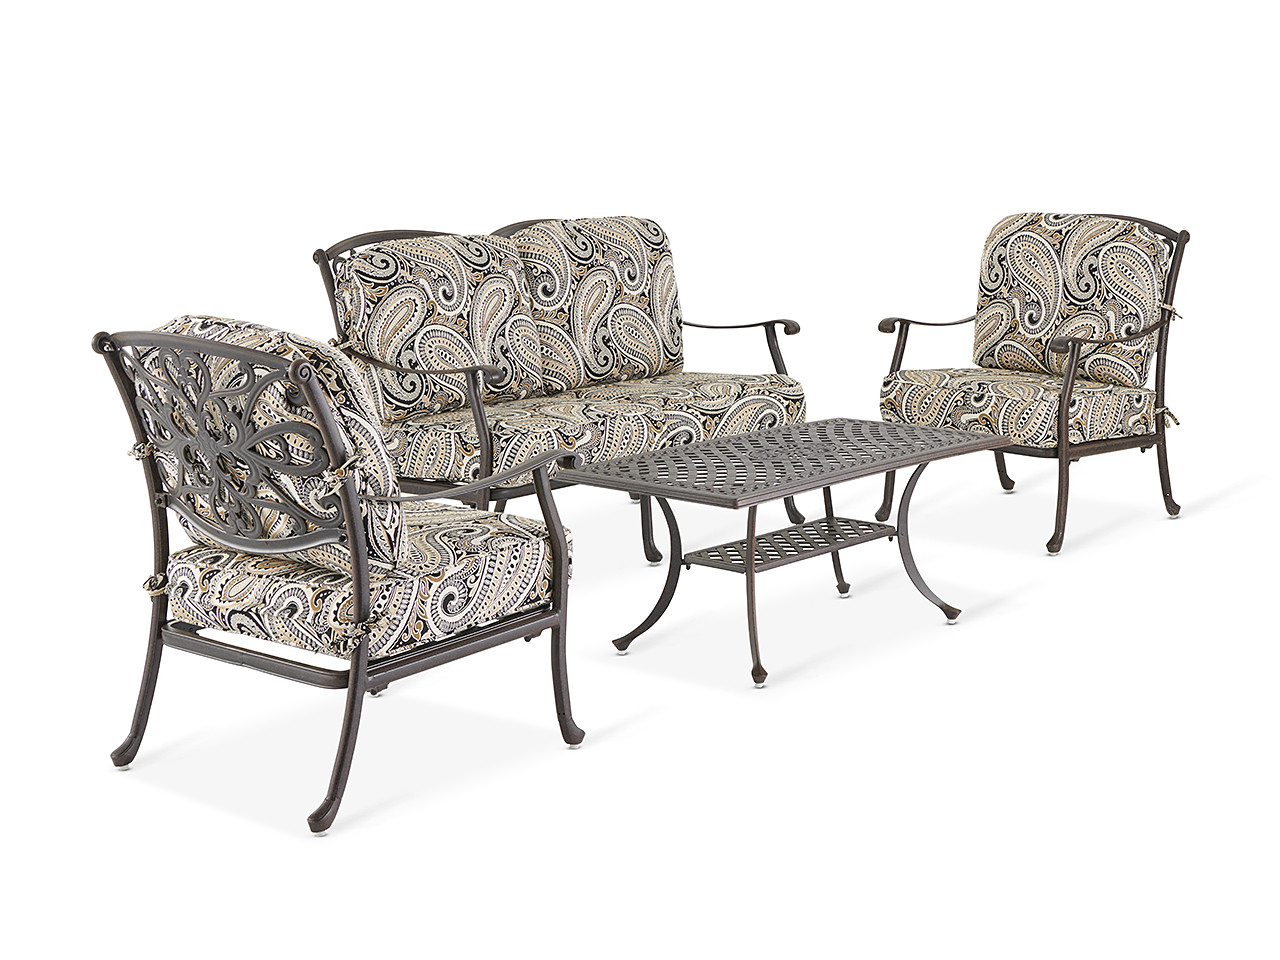 Carlisle Aged Bronze Cast Aluminum and Royce Sesame Cushion 4 Pc. Loveseat Group with 45 x 24 in. Coffee Table